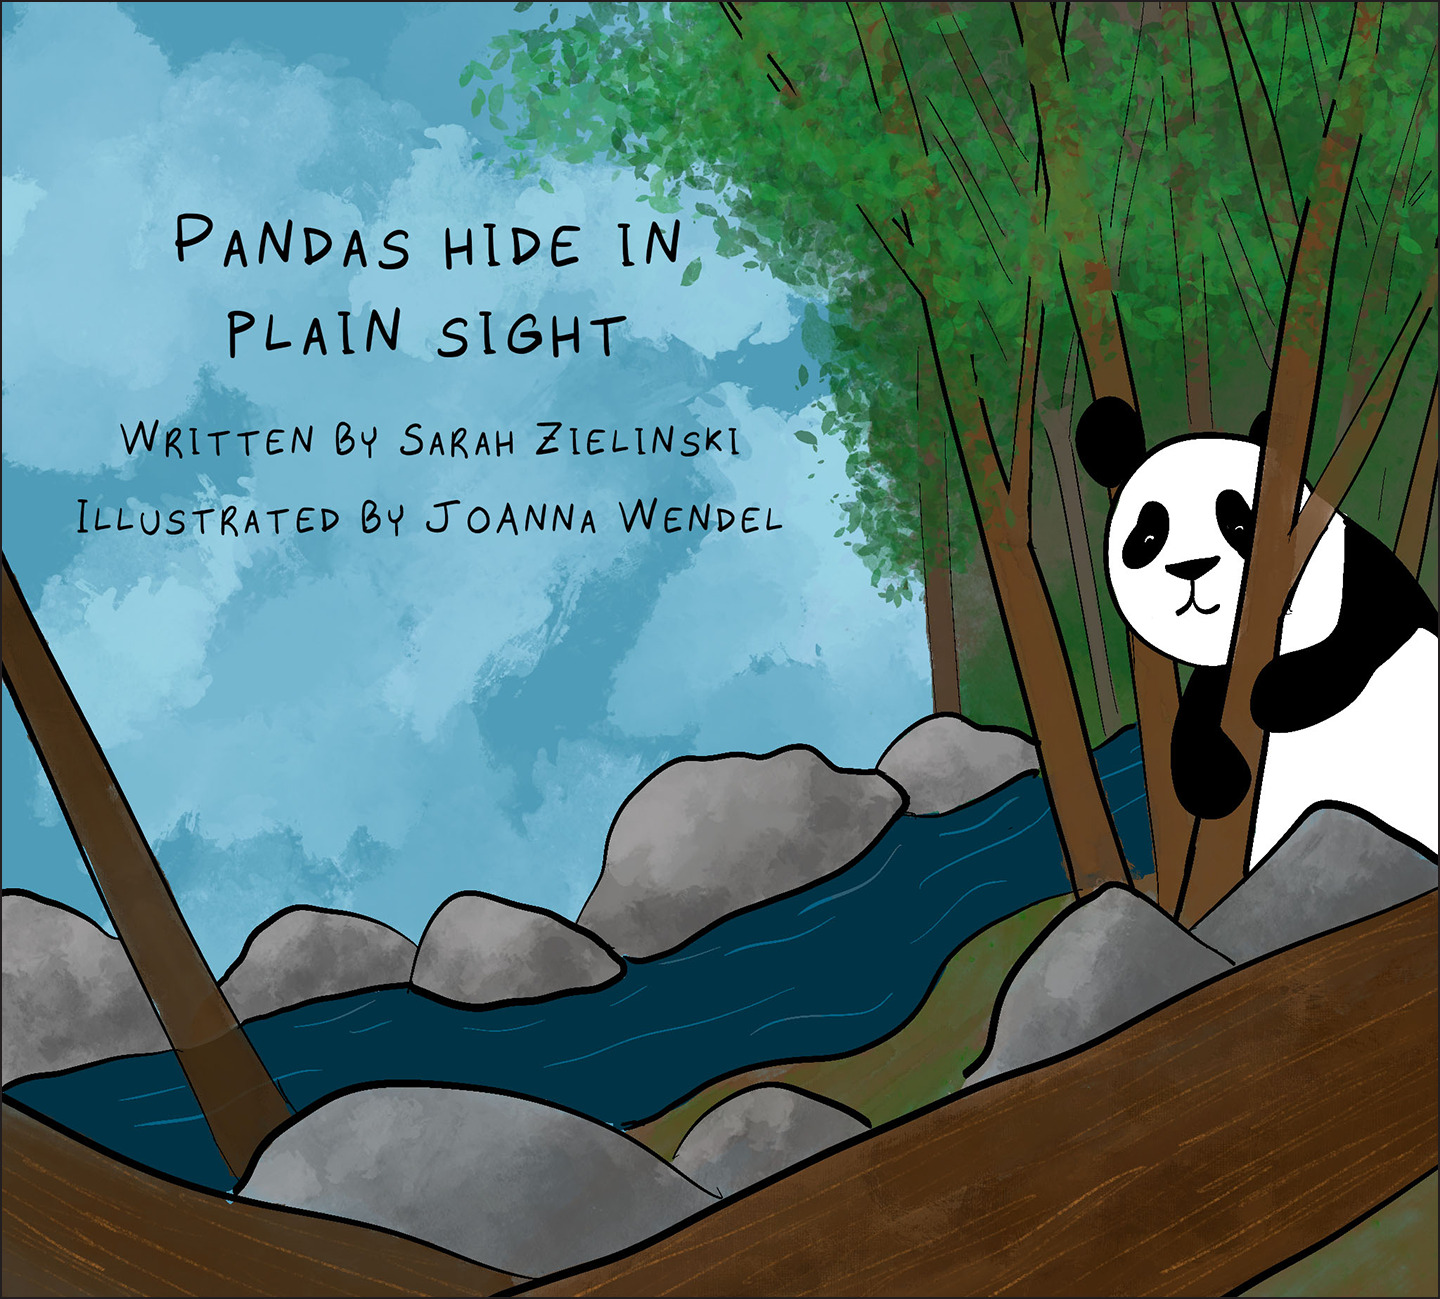 an illustration of a panda peeking out from behind some saplings. Text reads "A panda hides in plain sight Written by Sarah Zielinski Illustrated by JoAnna Wendel"